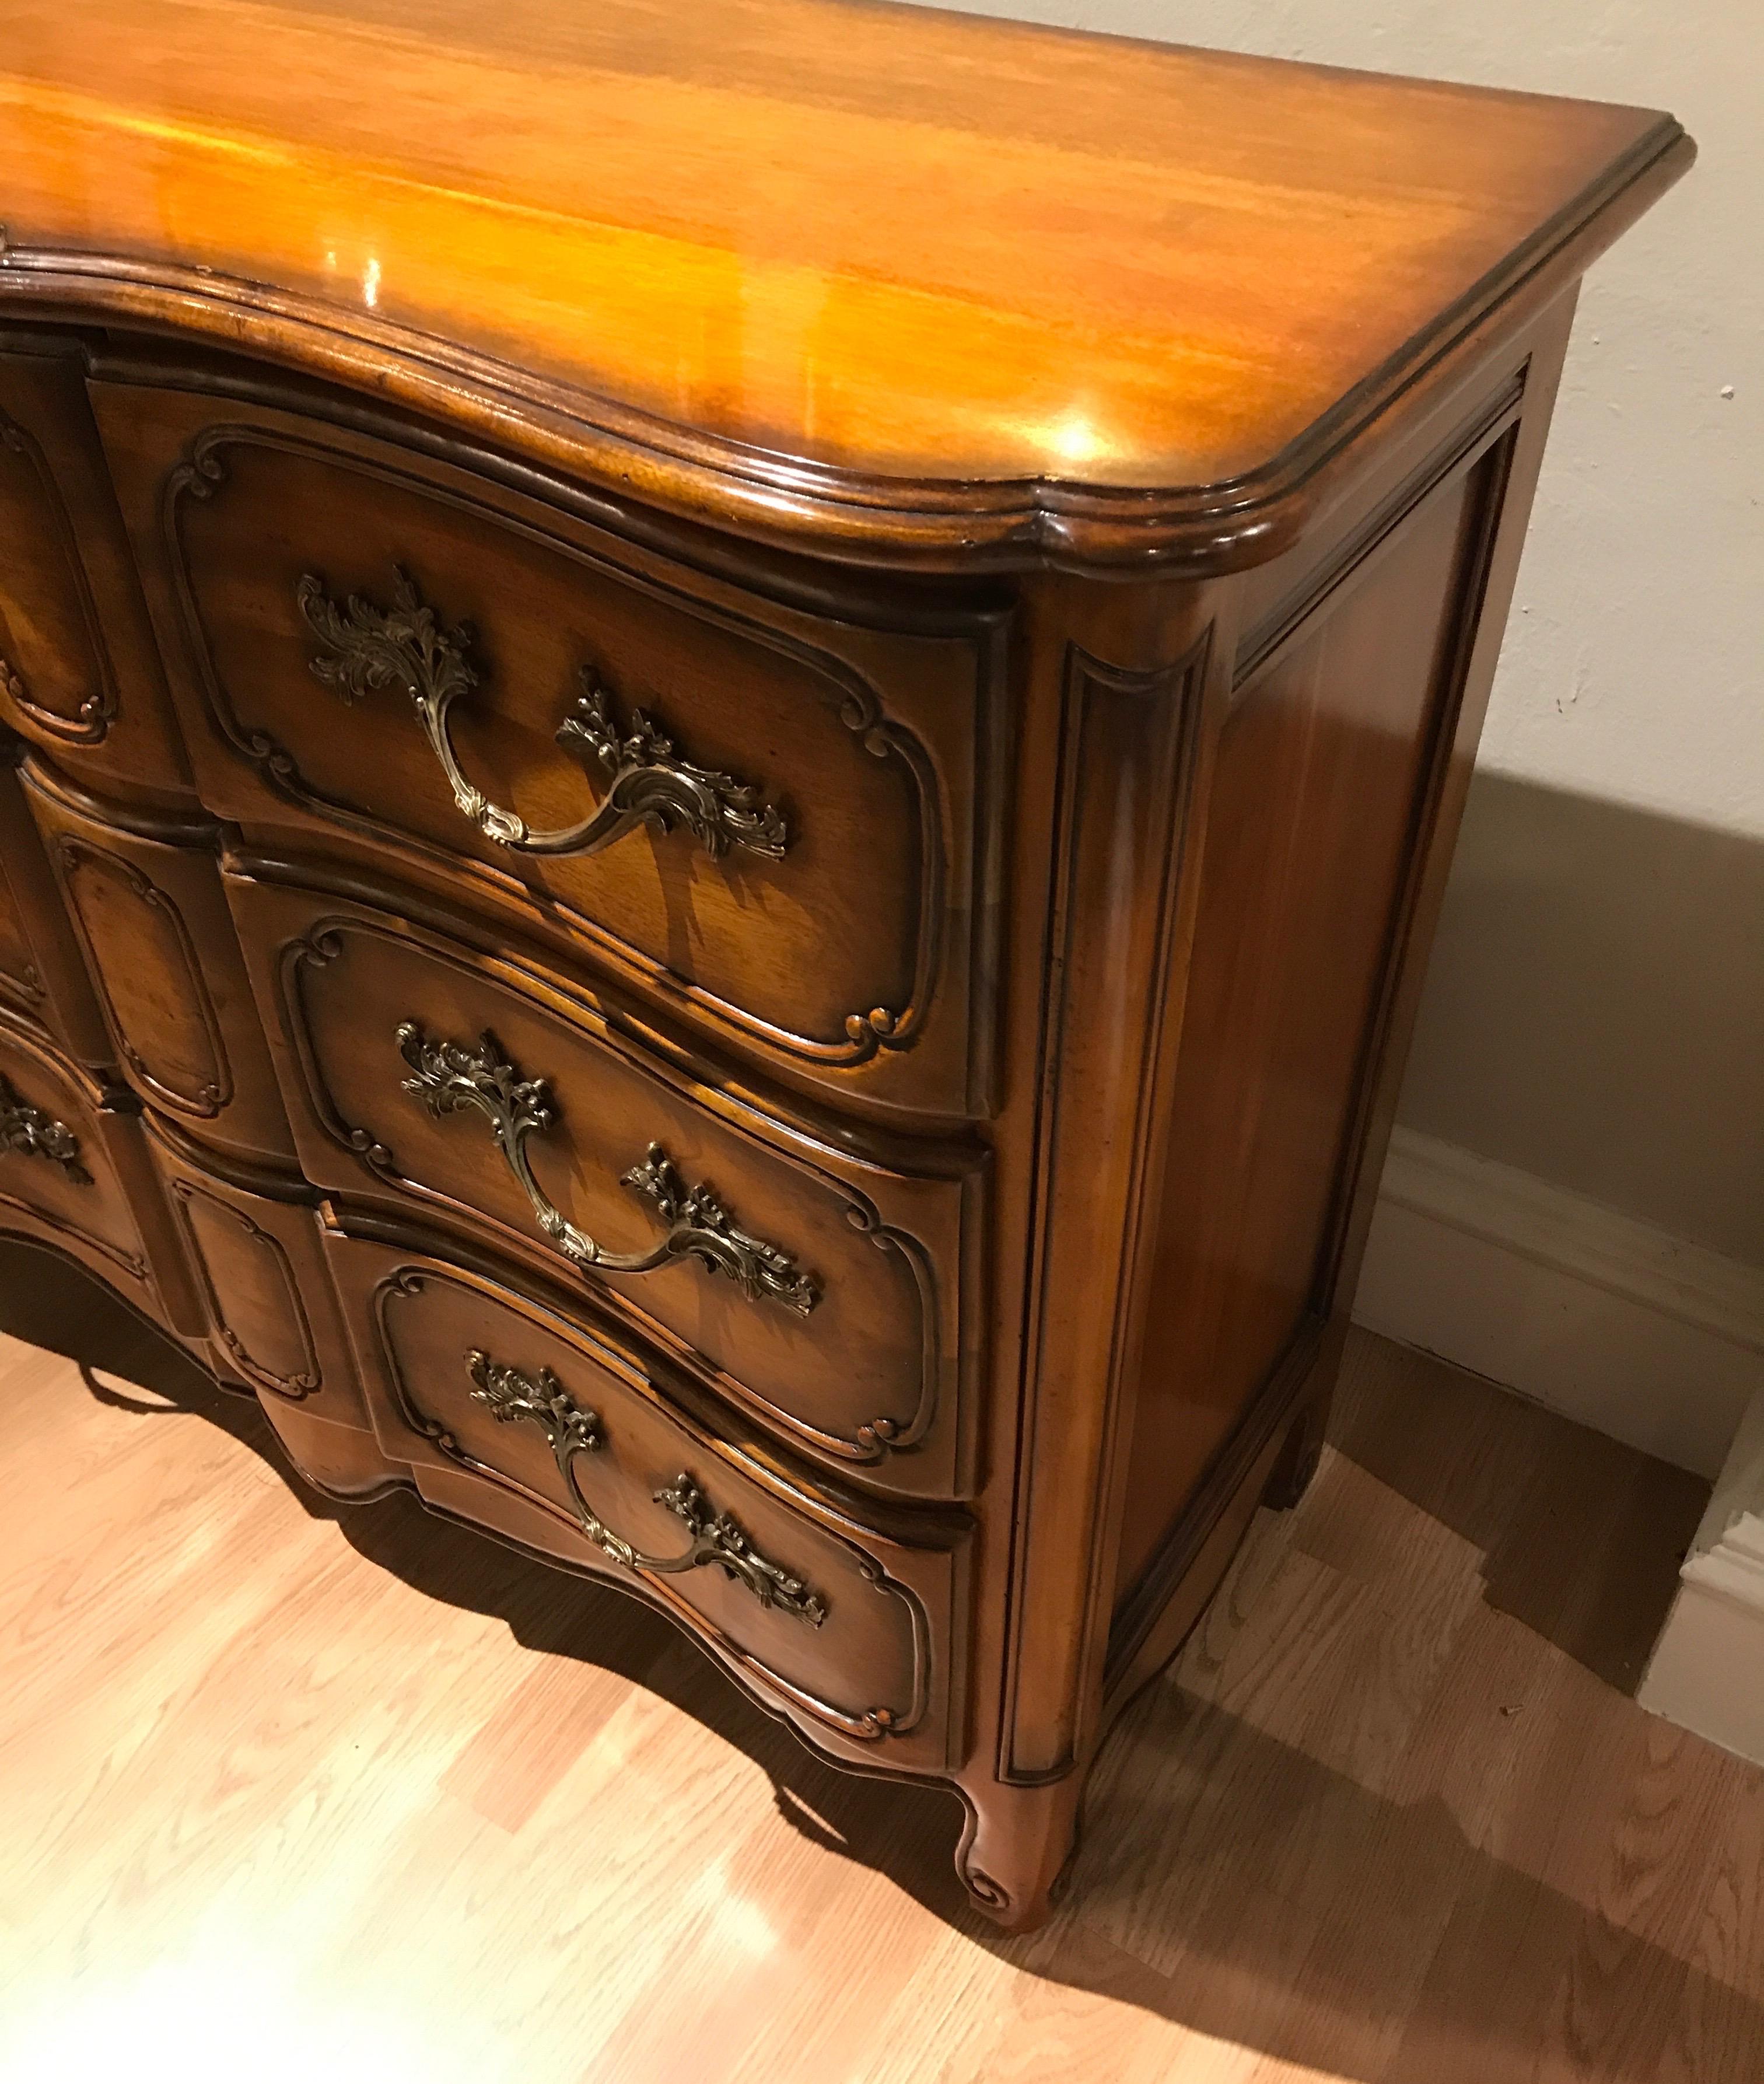 Finely made French Provincial style three-drawer commode with large bronze pulls. Wonderful attention to detail.